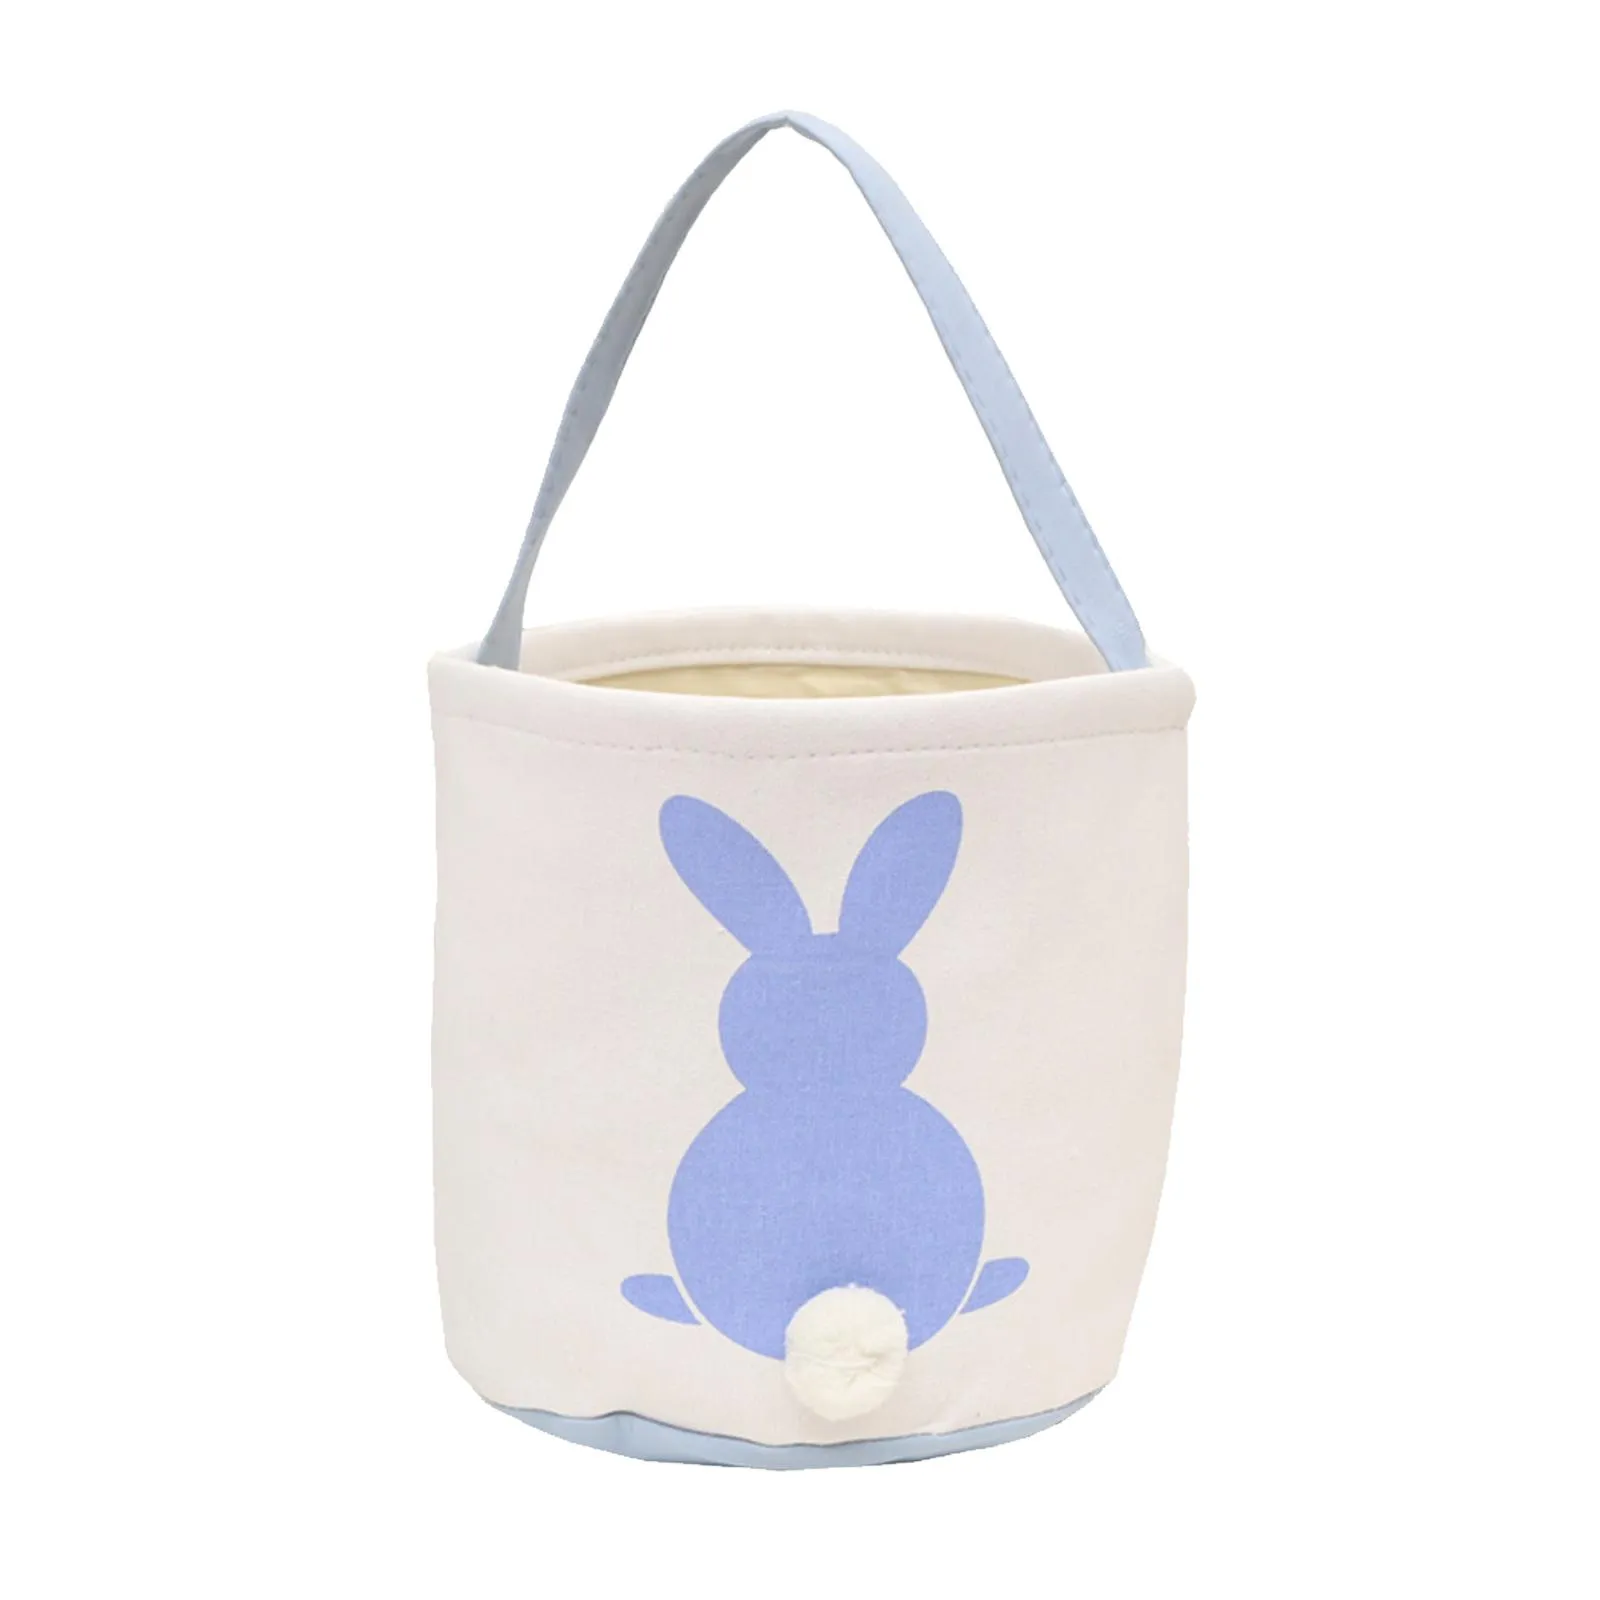 party favor Easter Bunny Basket Bags for Kids Canvas Cotton Carrying Gift and Eggs Hunt Bag,Fluffy Tails Printed Rabbit Canvas Toys Bucket Tote